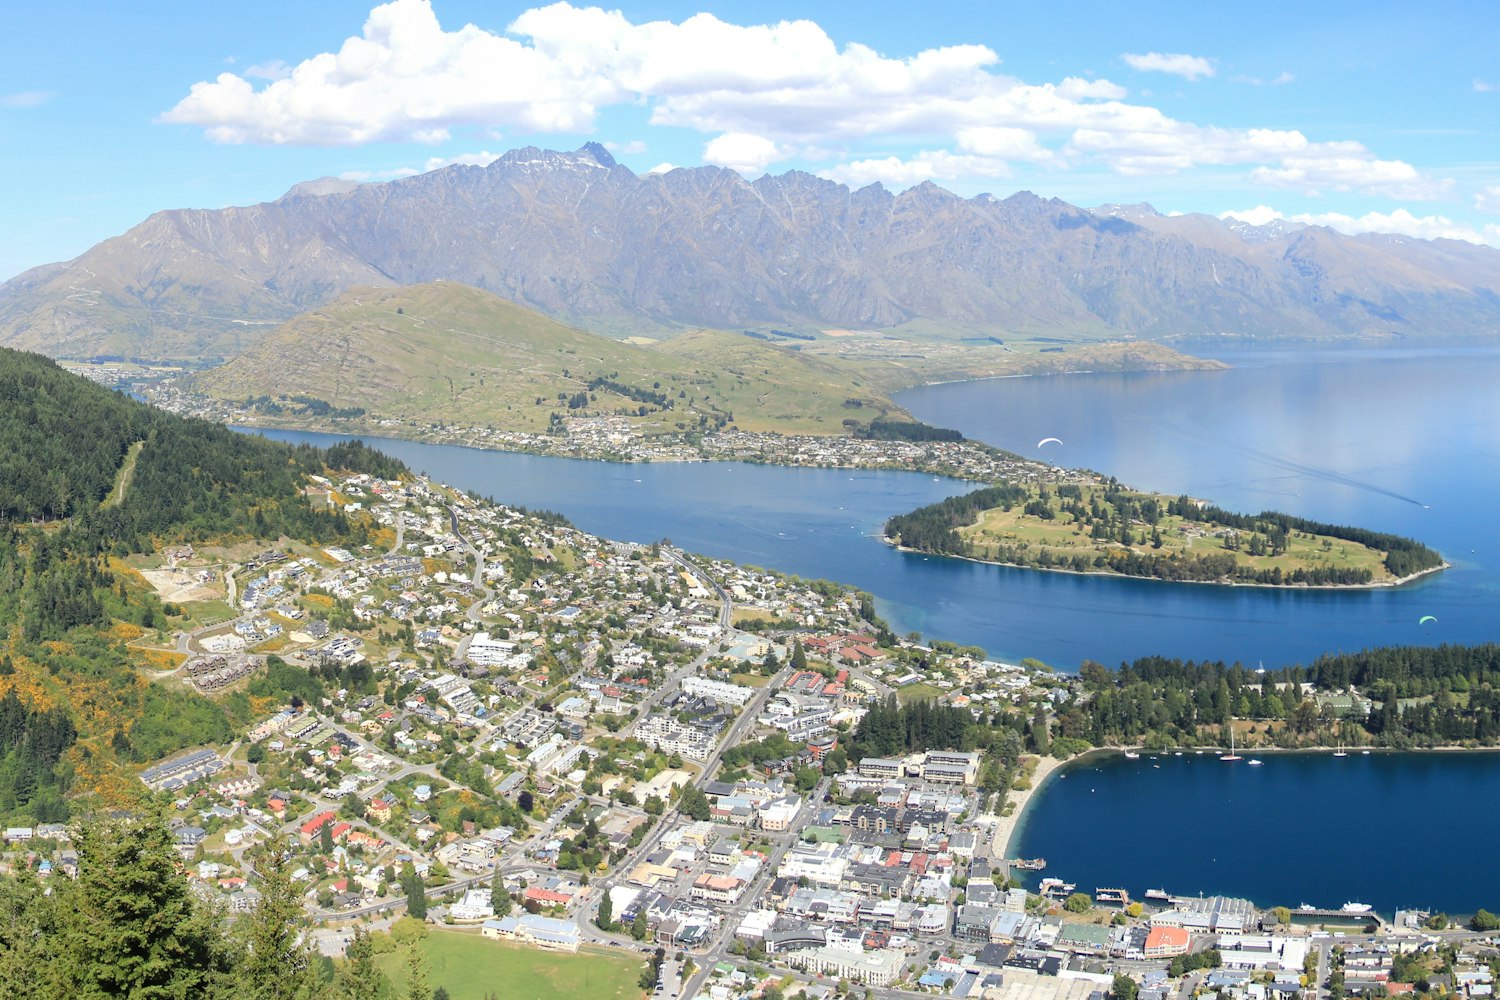 Queenstown | The Property Group NZ